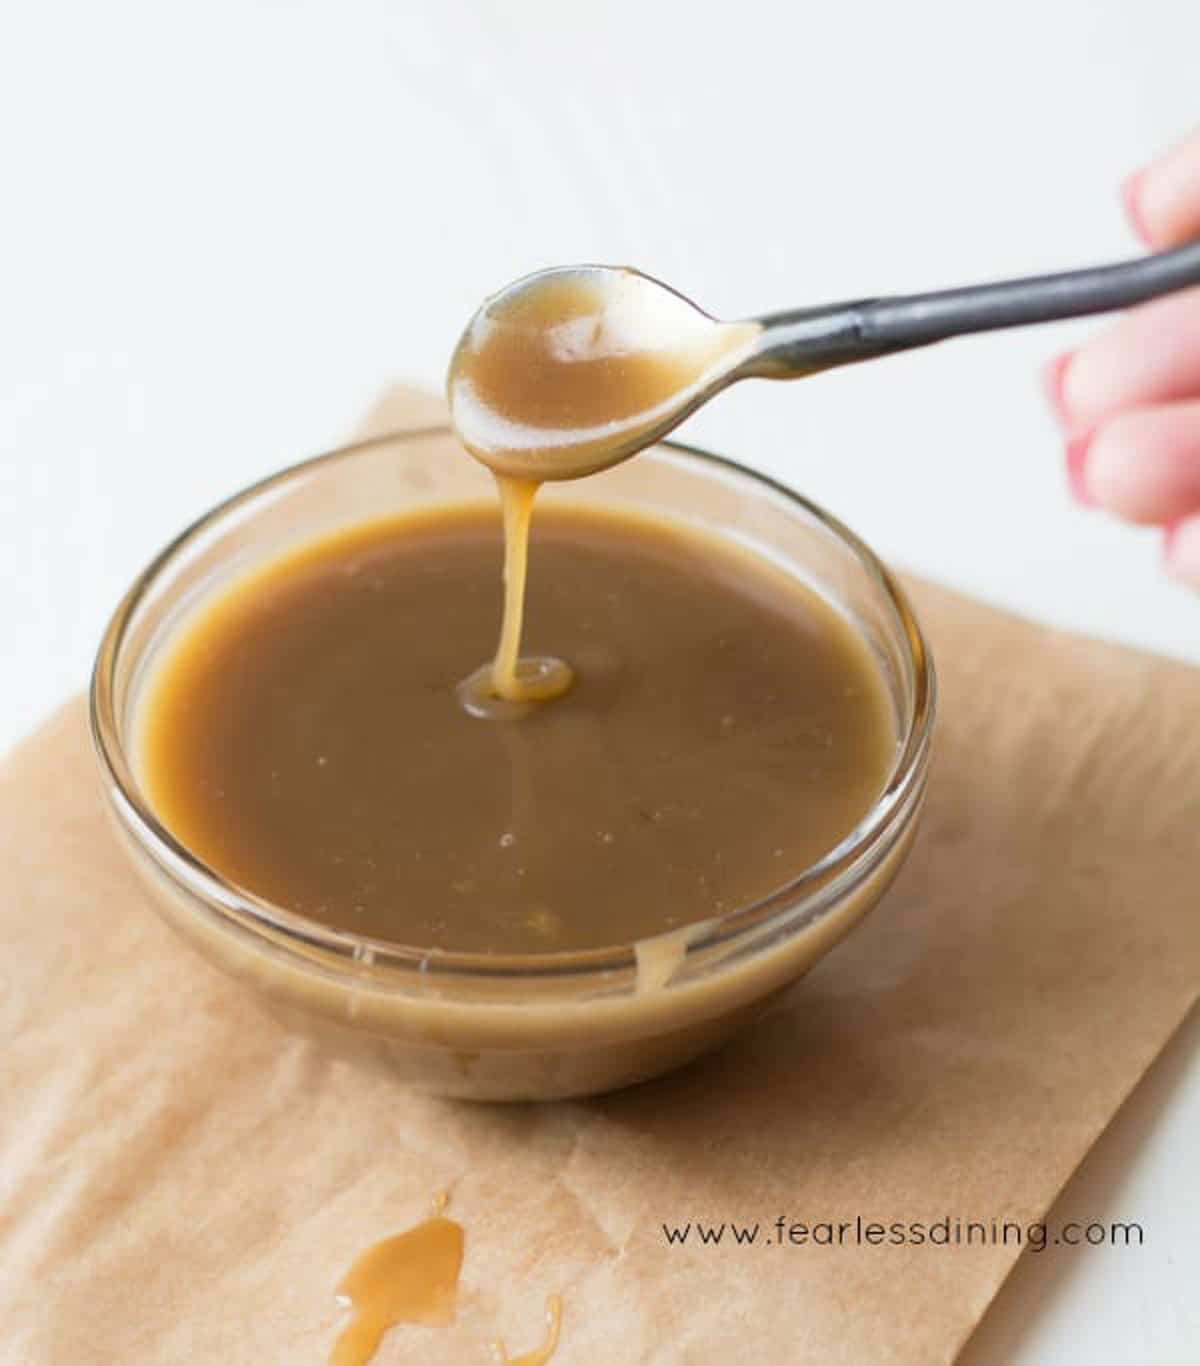 A glass bowl filled with butterscotch sauce. A spoon is drizzle the sauce into the bowl.